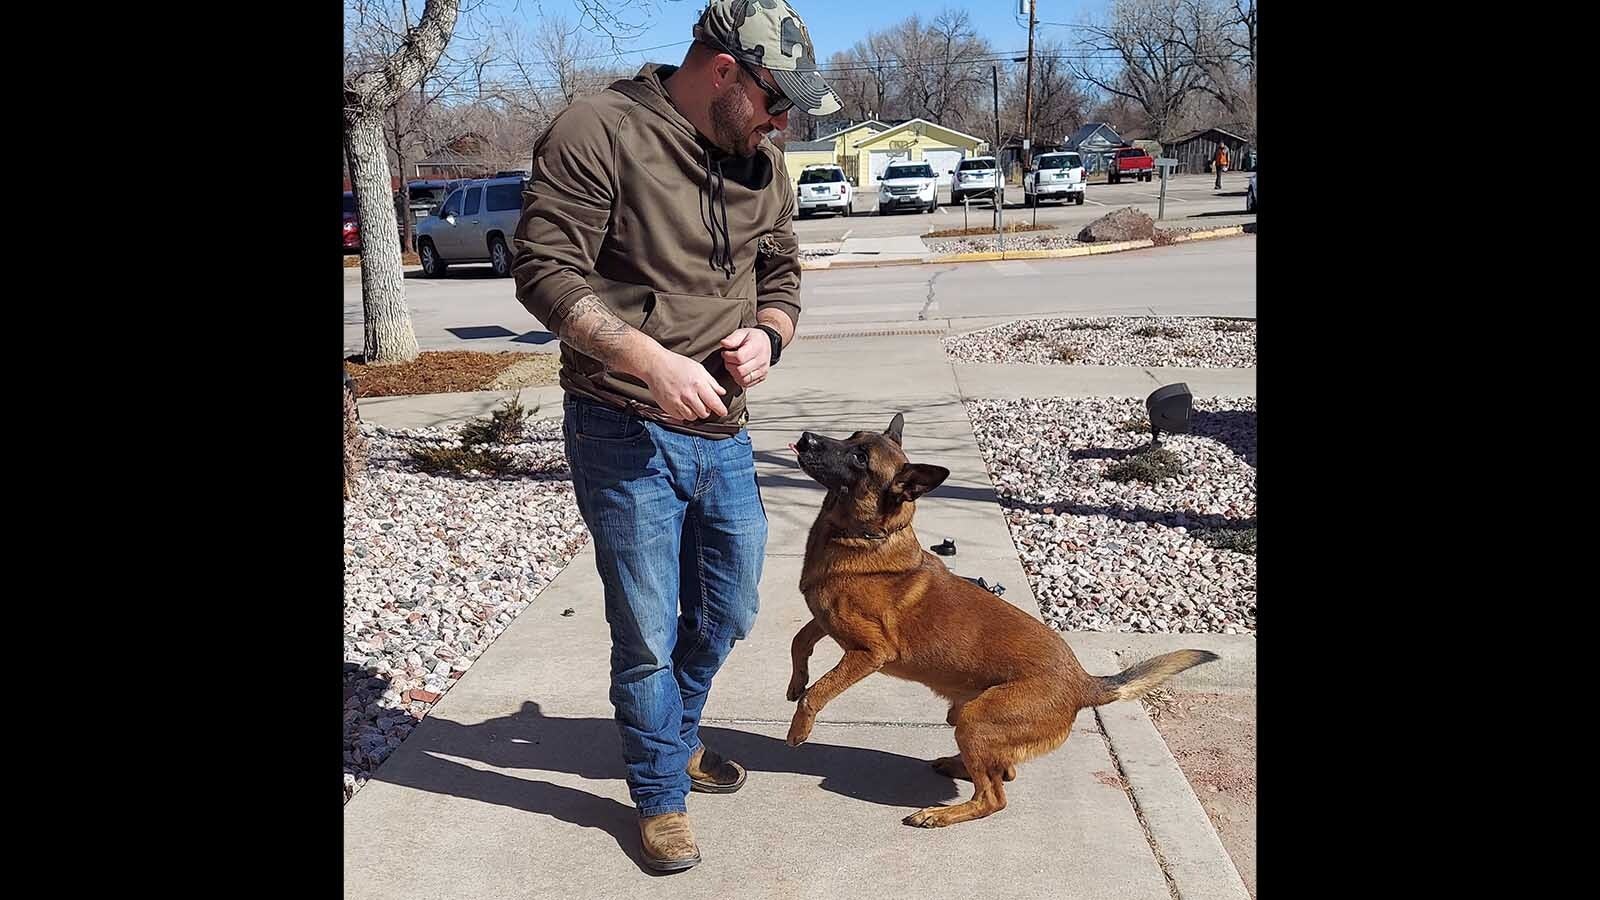 Gillette Police Department Cpl. Trevor Johnson with his pet Belgian Malinois Bilko. But until recently, Bilko was a rock-star K-9 officer partnered with Johnson until the 8-year-old police dog was retired.